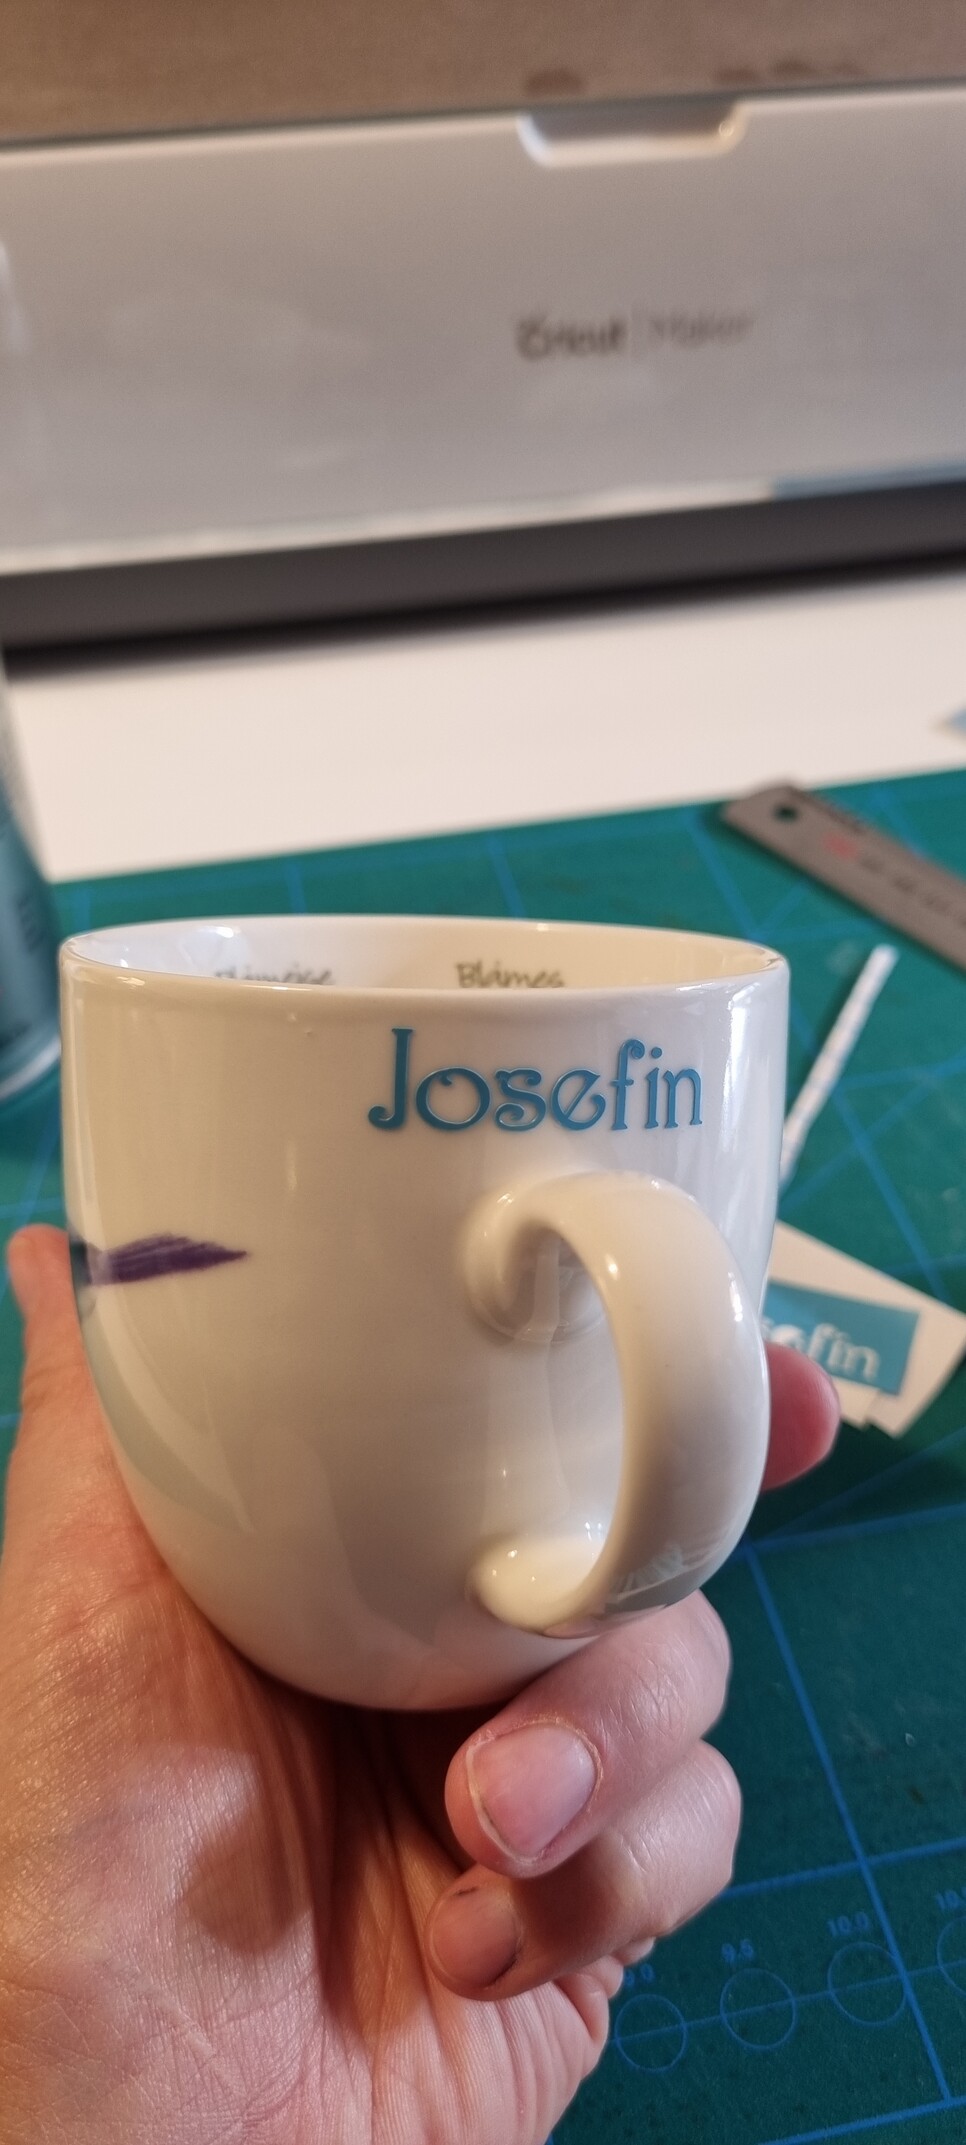 The handle side of the same cup has the name "Josefin" written in semi fancy font.